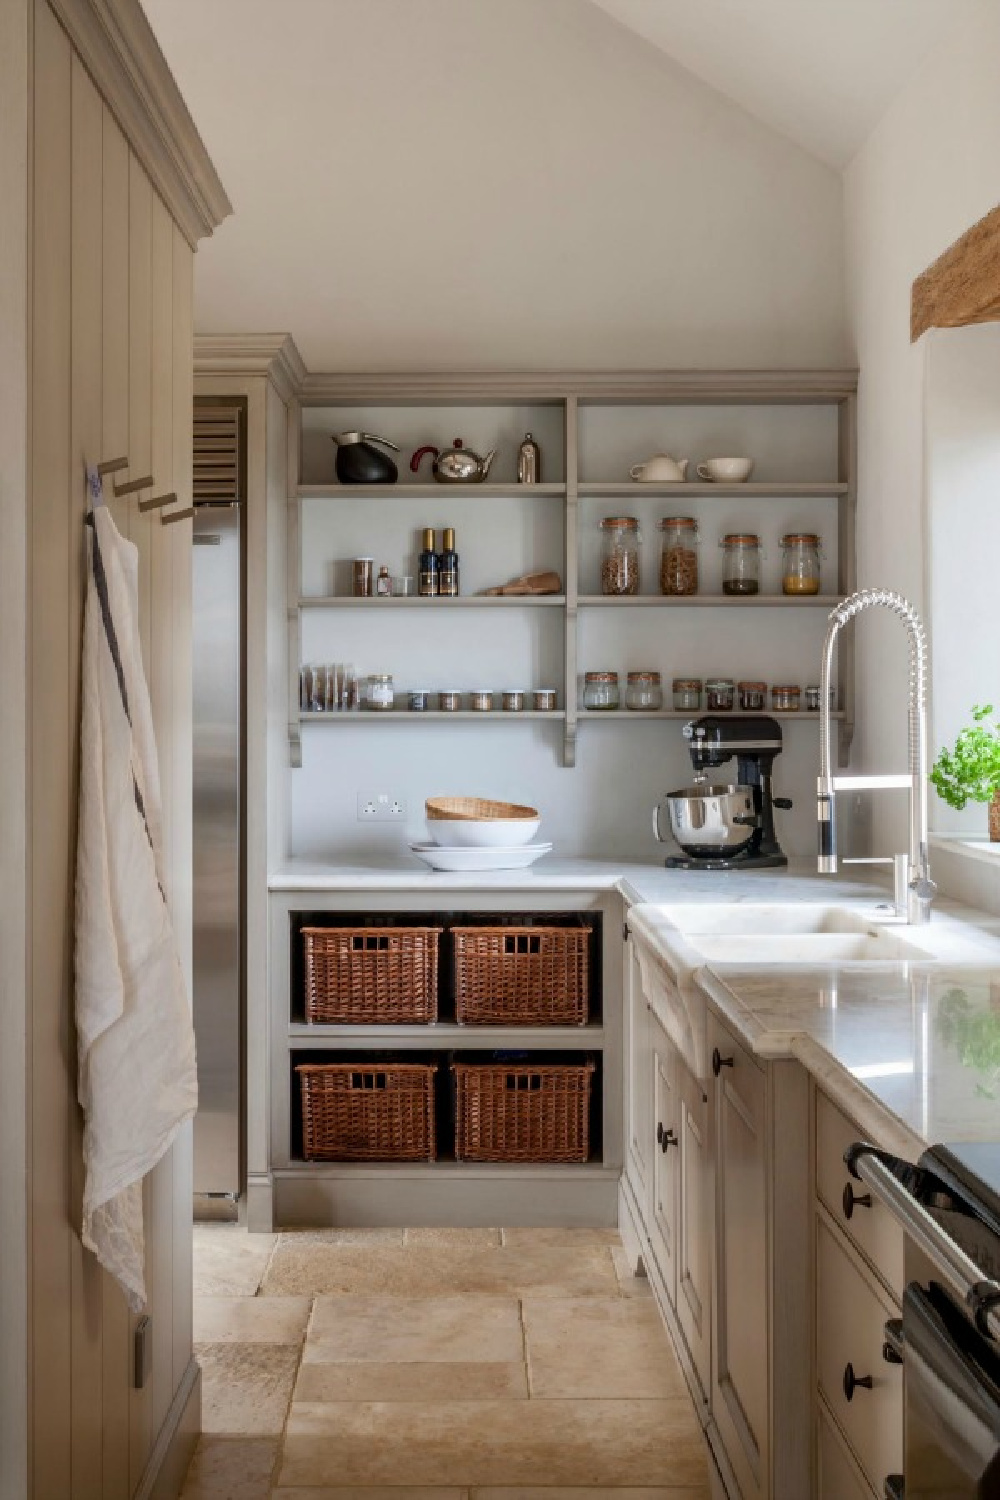 Bespoke kitchen with Flemish design influences and French farmhouse style. Design by Artichoke. Stone flooring, painted cabinets, open shelving, and rustic baskets. #frenchfarmhouse #kitchendesign